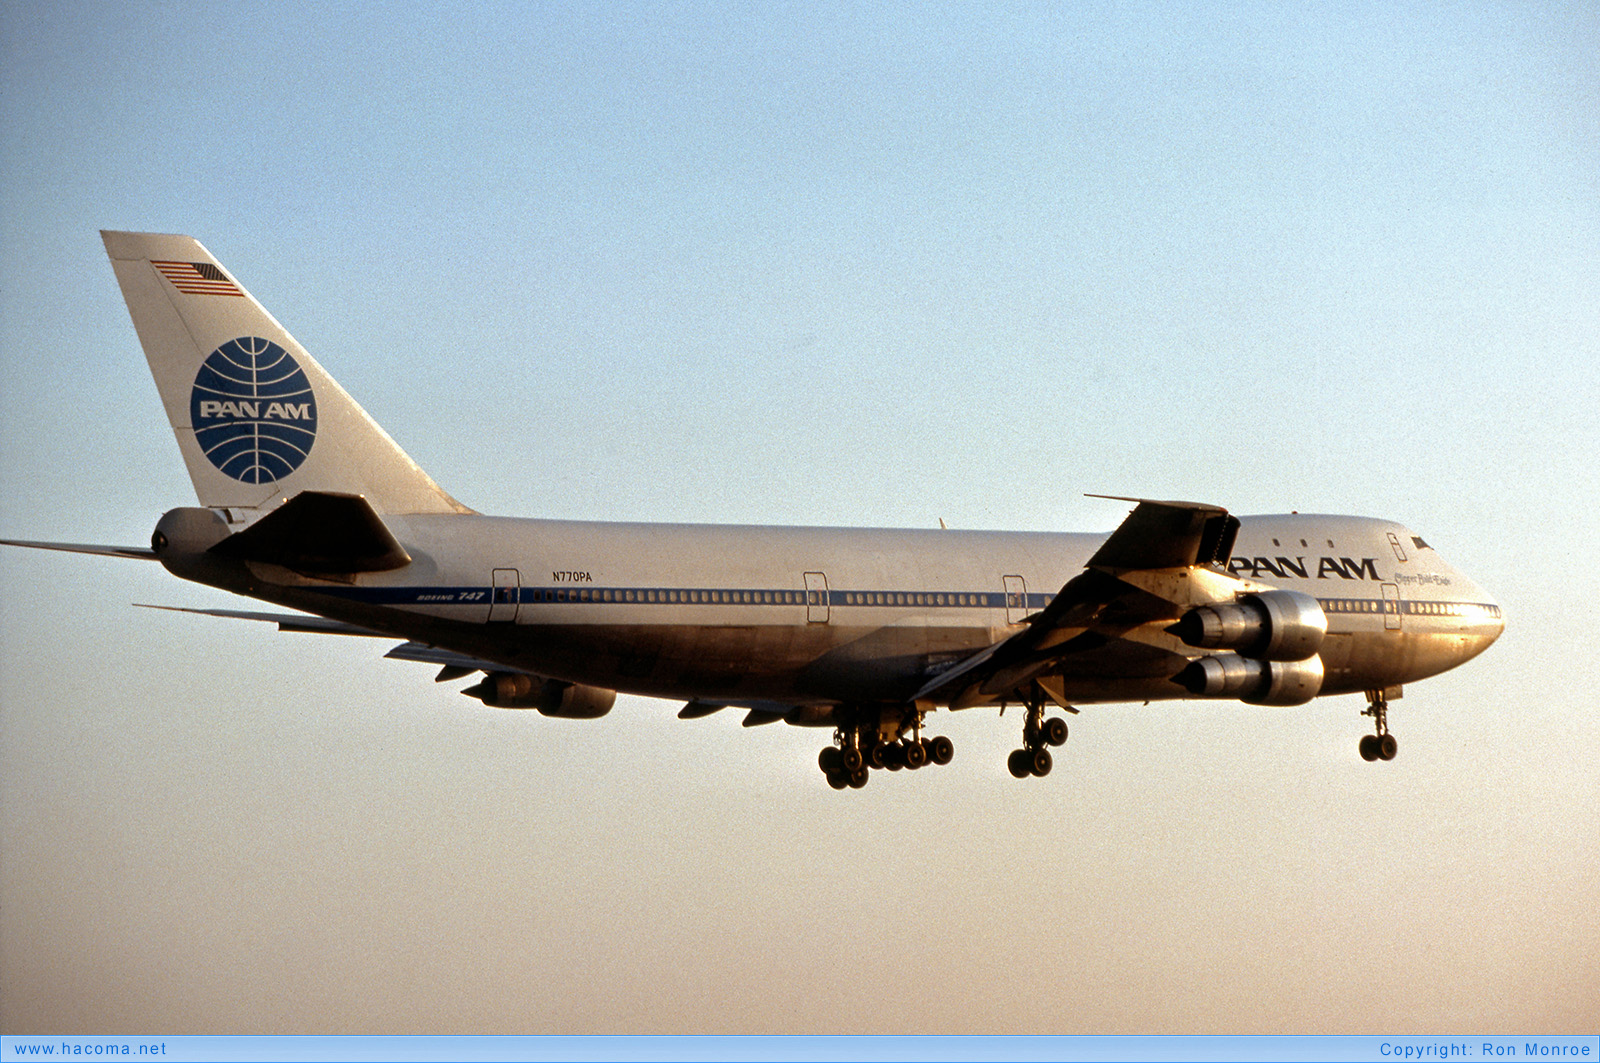 Photo of N770PA - Pan Am Clipper Great Republic / Bald Eagle - Los Angeles International Airport - Apr 1977